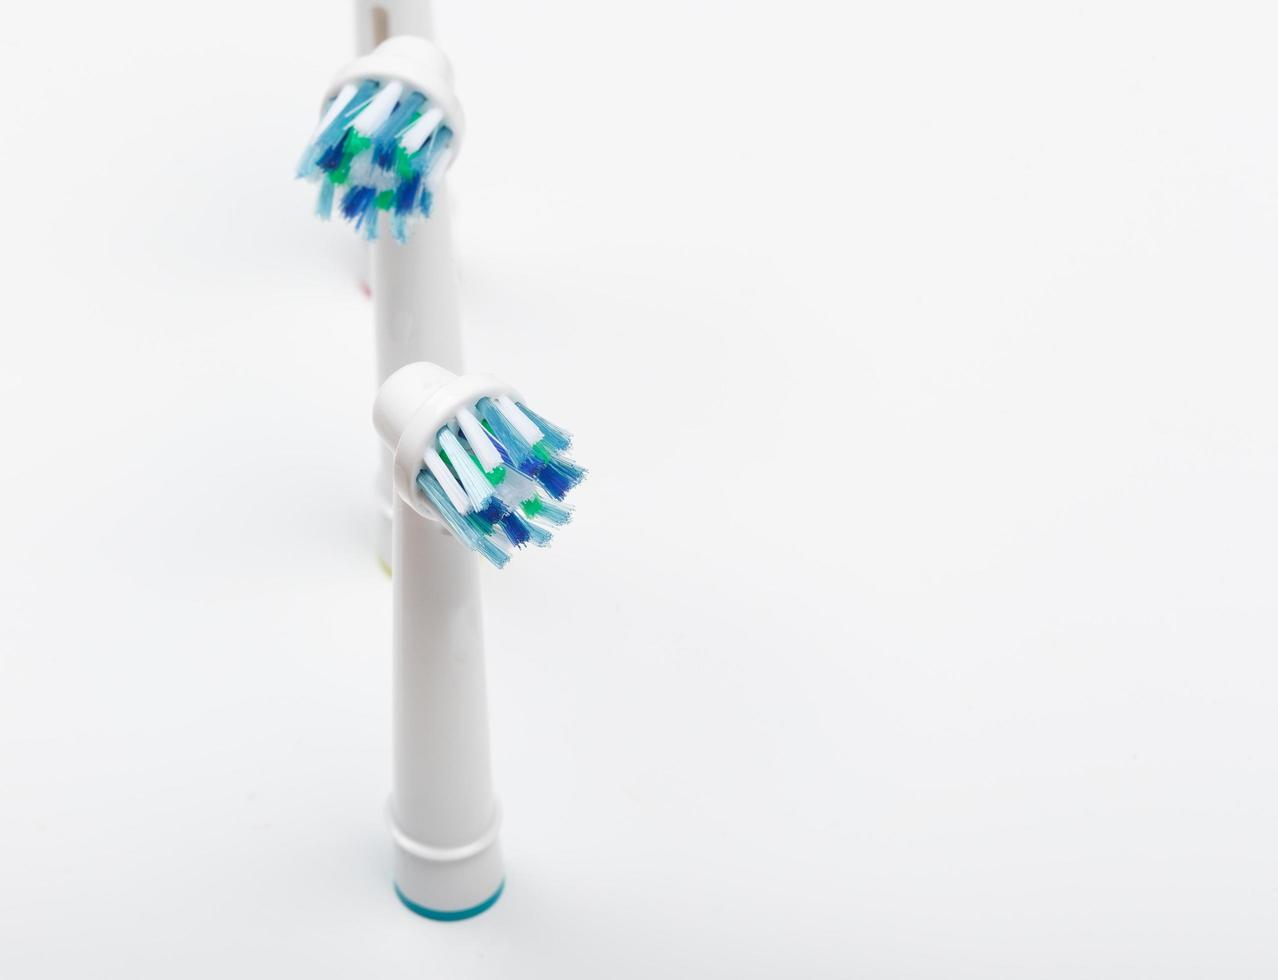 Toothbrush head, oral hygiene , professional dental care photo